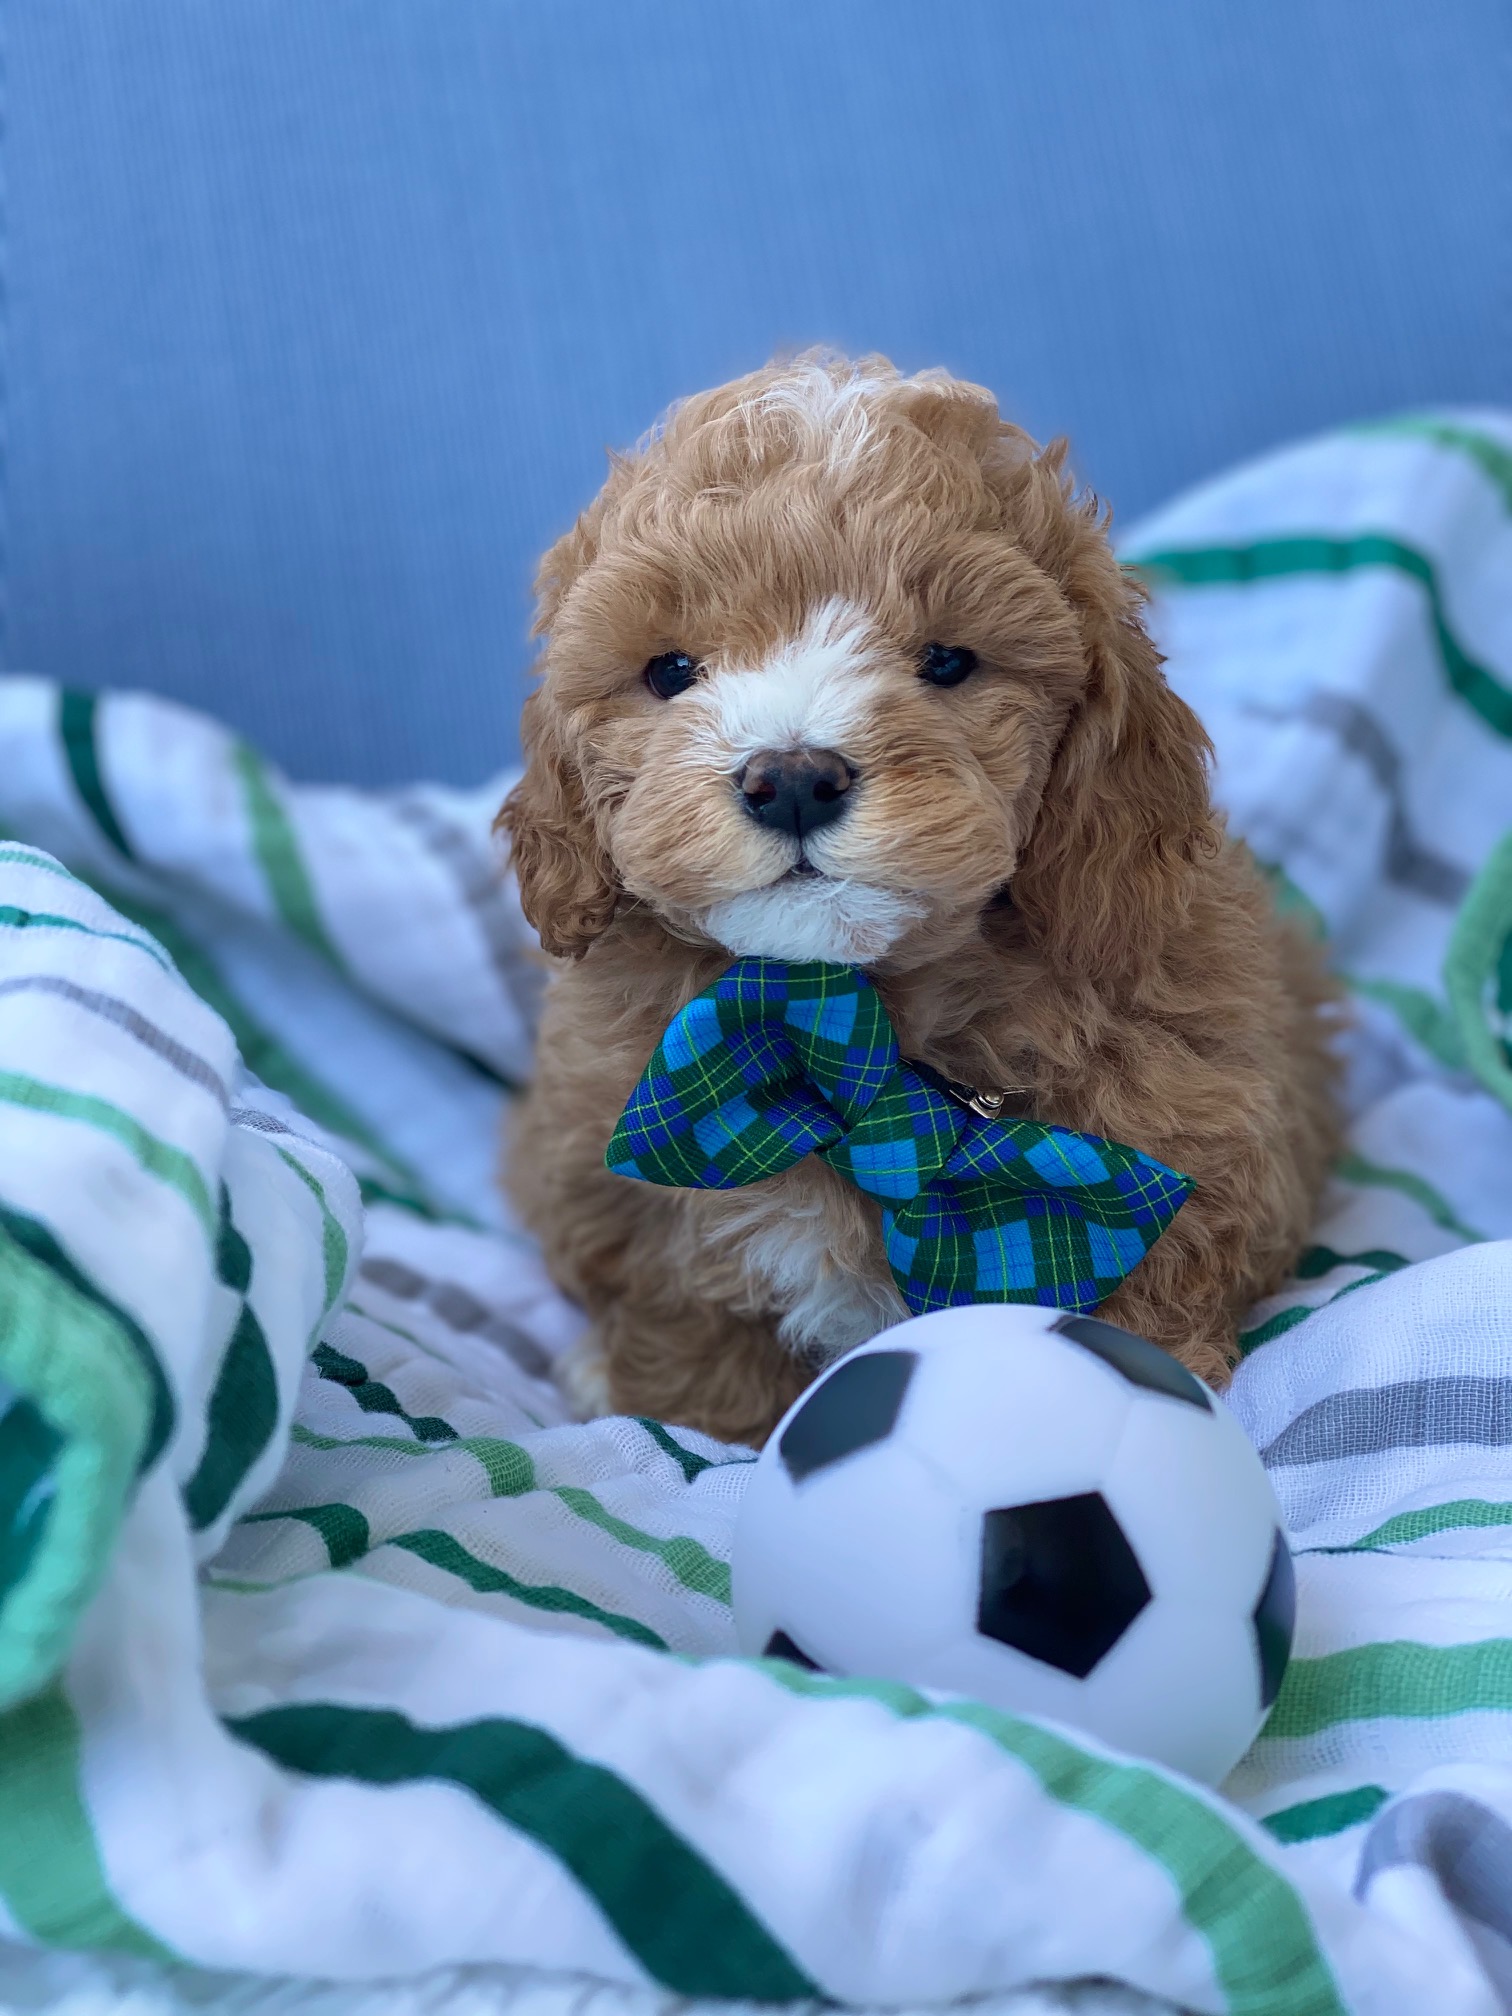 A tiny brown puppy wearing a blue bow tie is sitting on a bed, looking adorable.